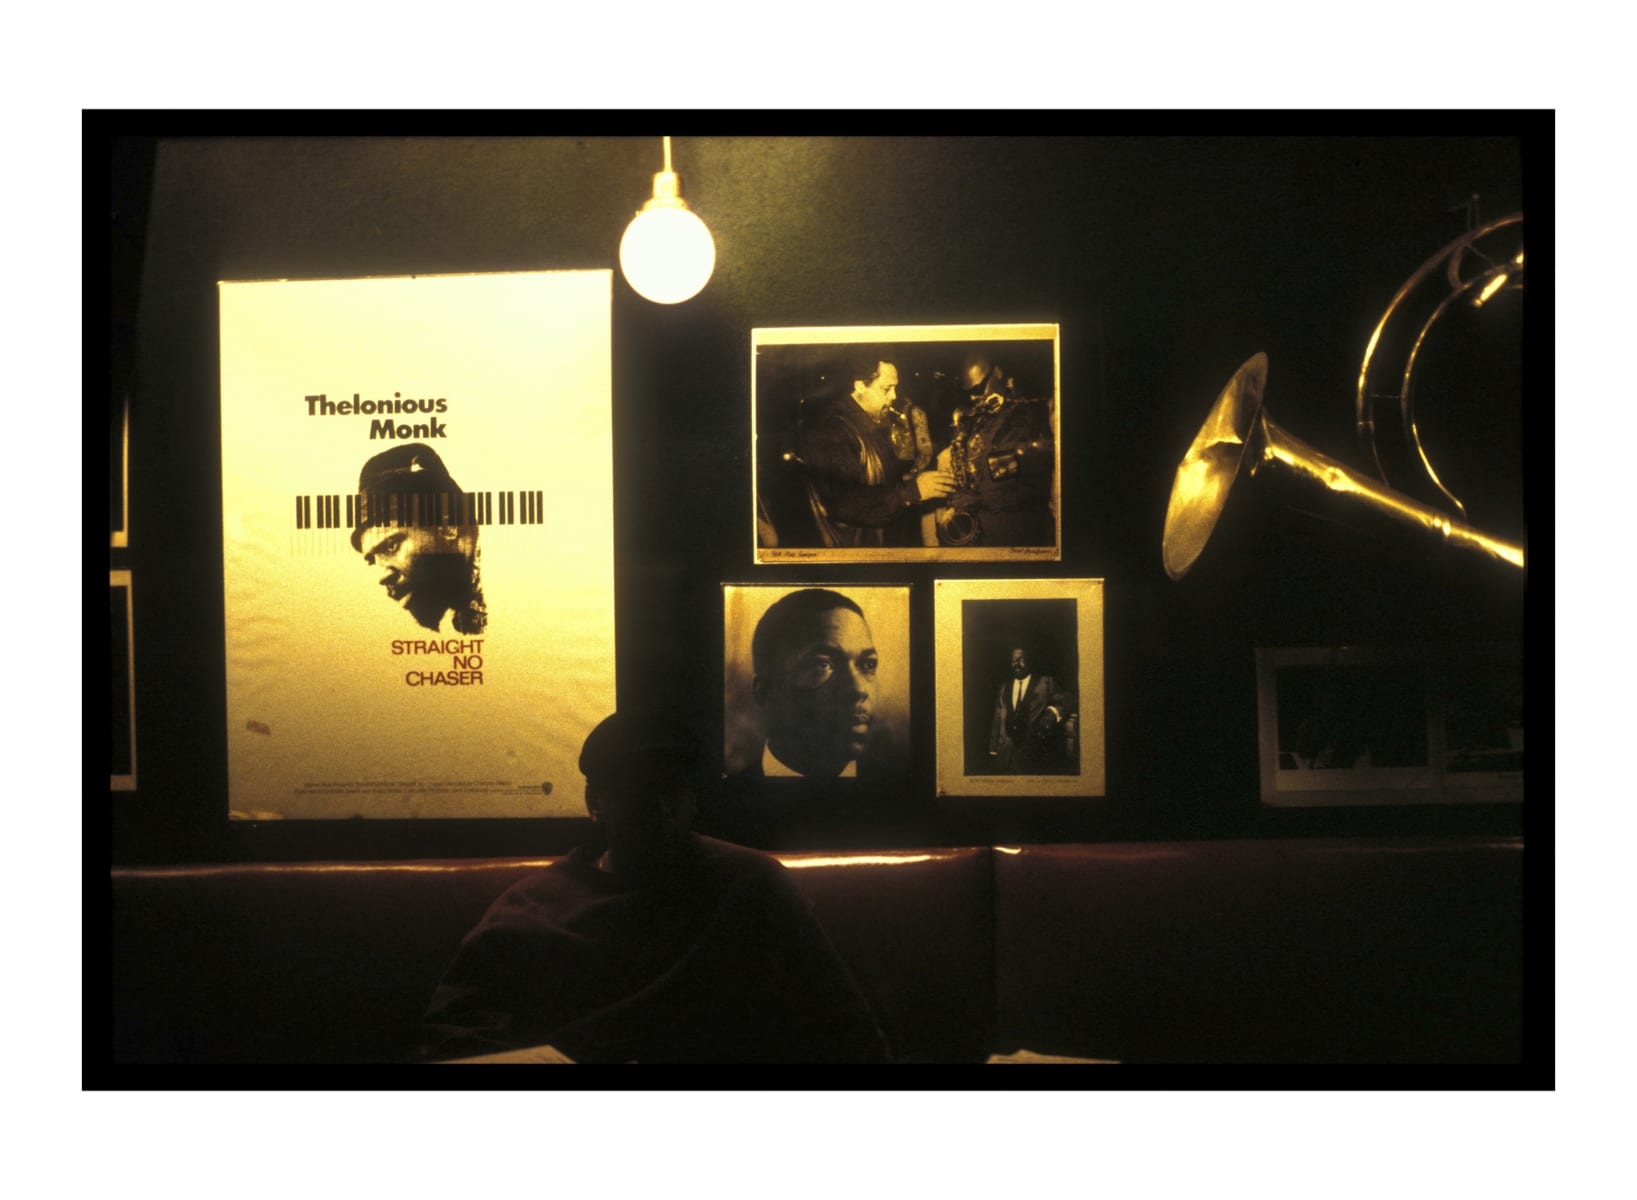 Played famous year-long stint at The Five Spot with Thelonious Monk